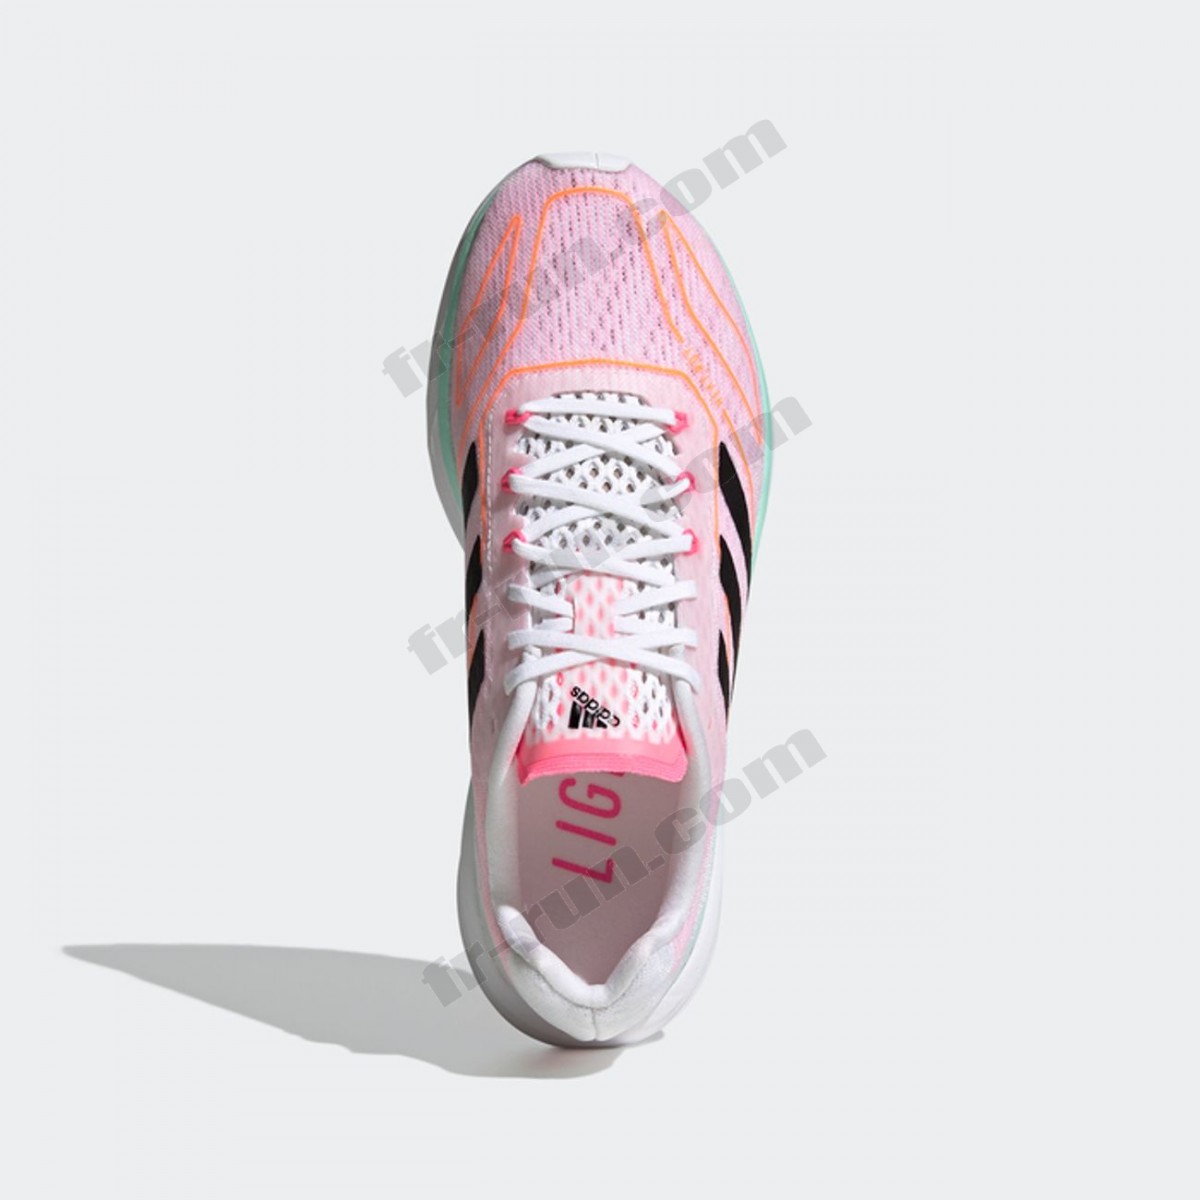 Adidas/CHAUSSURES BASSES running femme ADIDAS SL20.2 W √ Nouveau style √ Soldes - -2